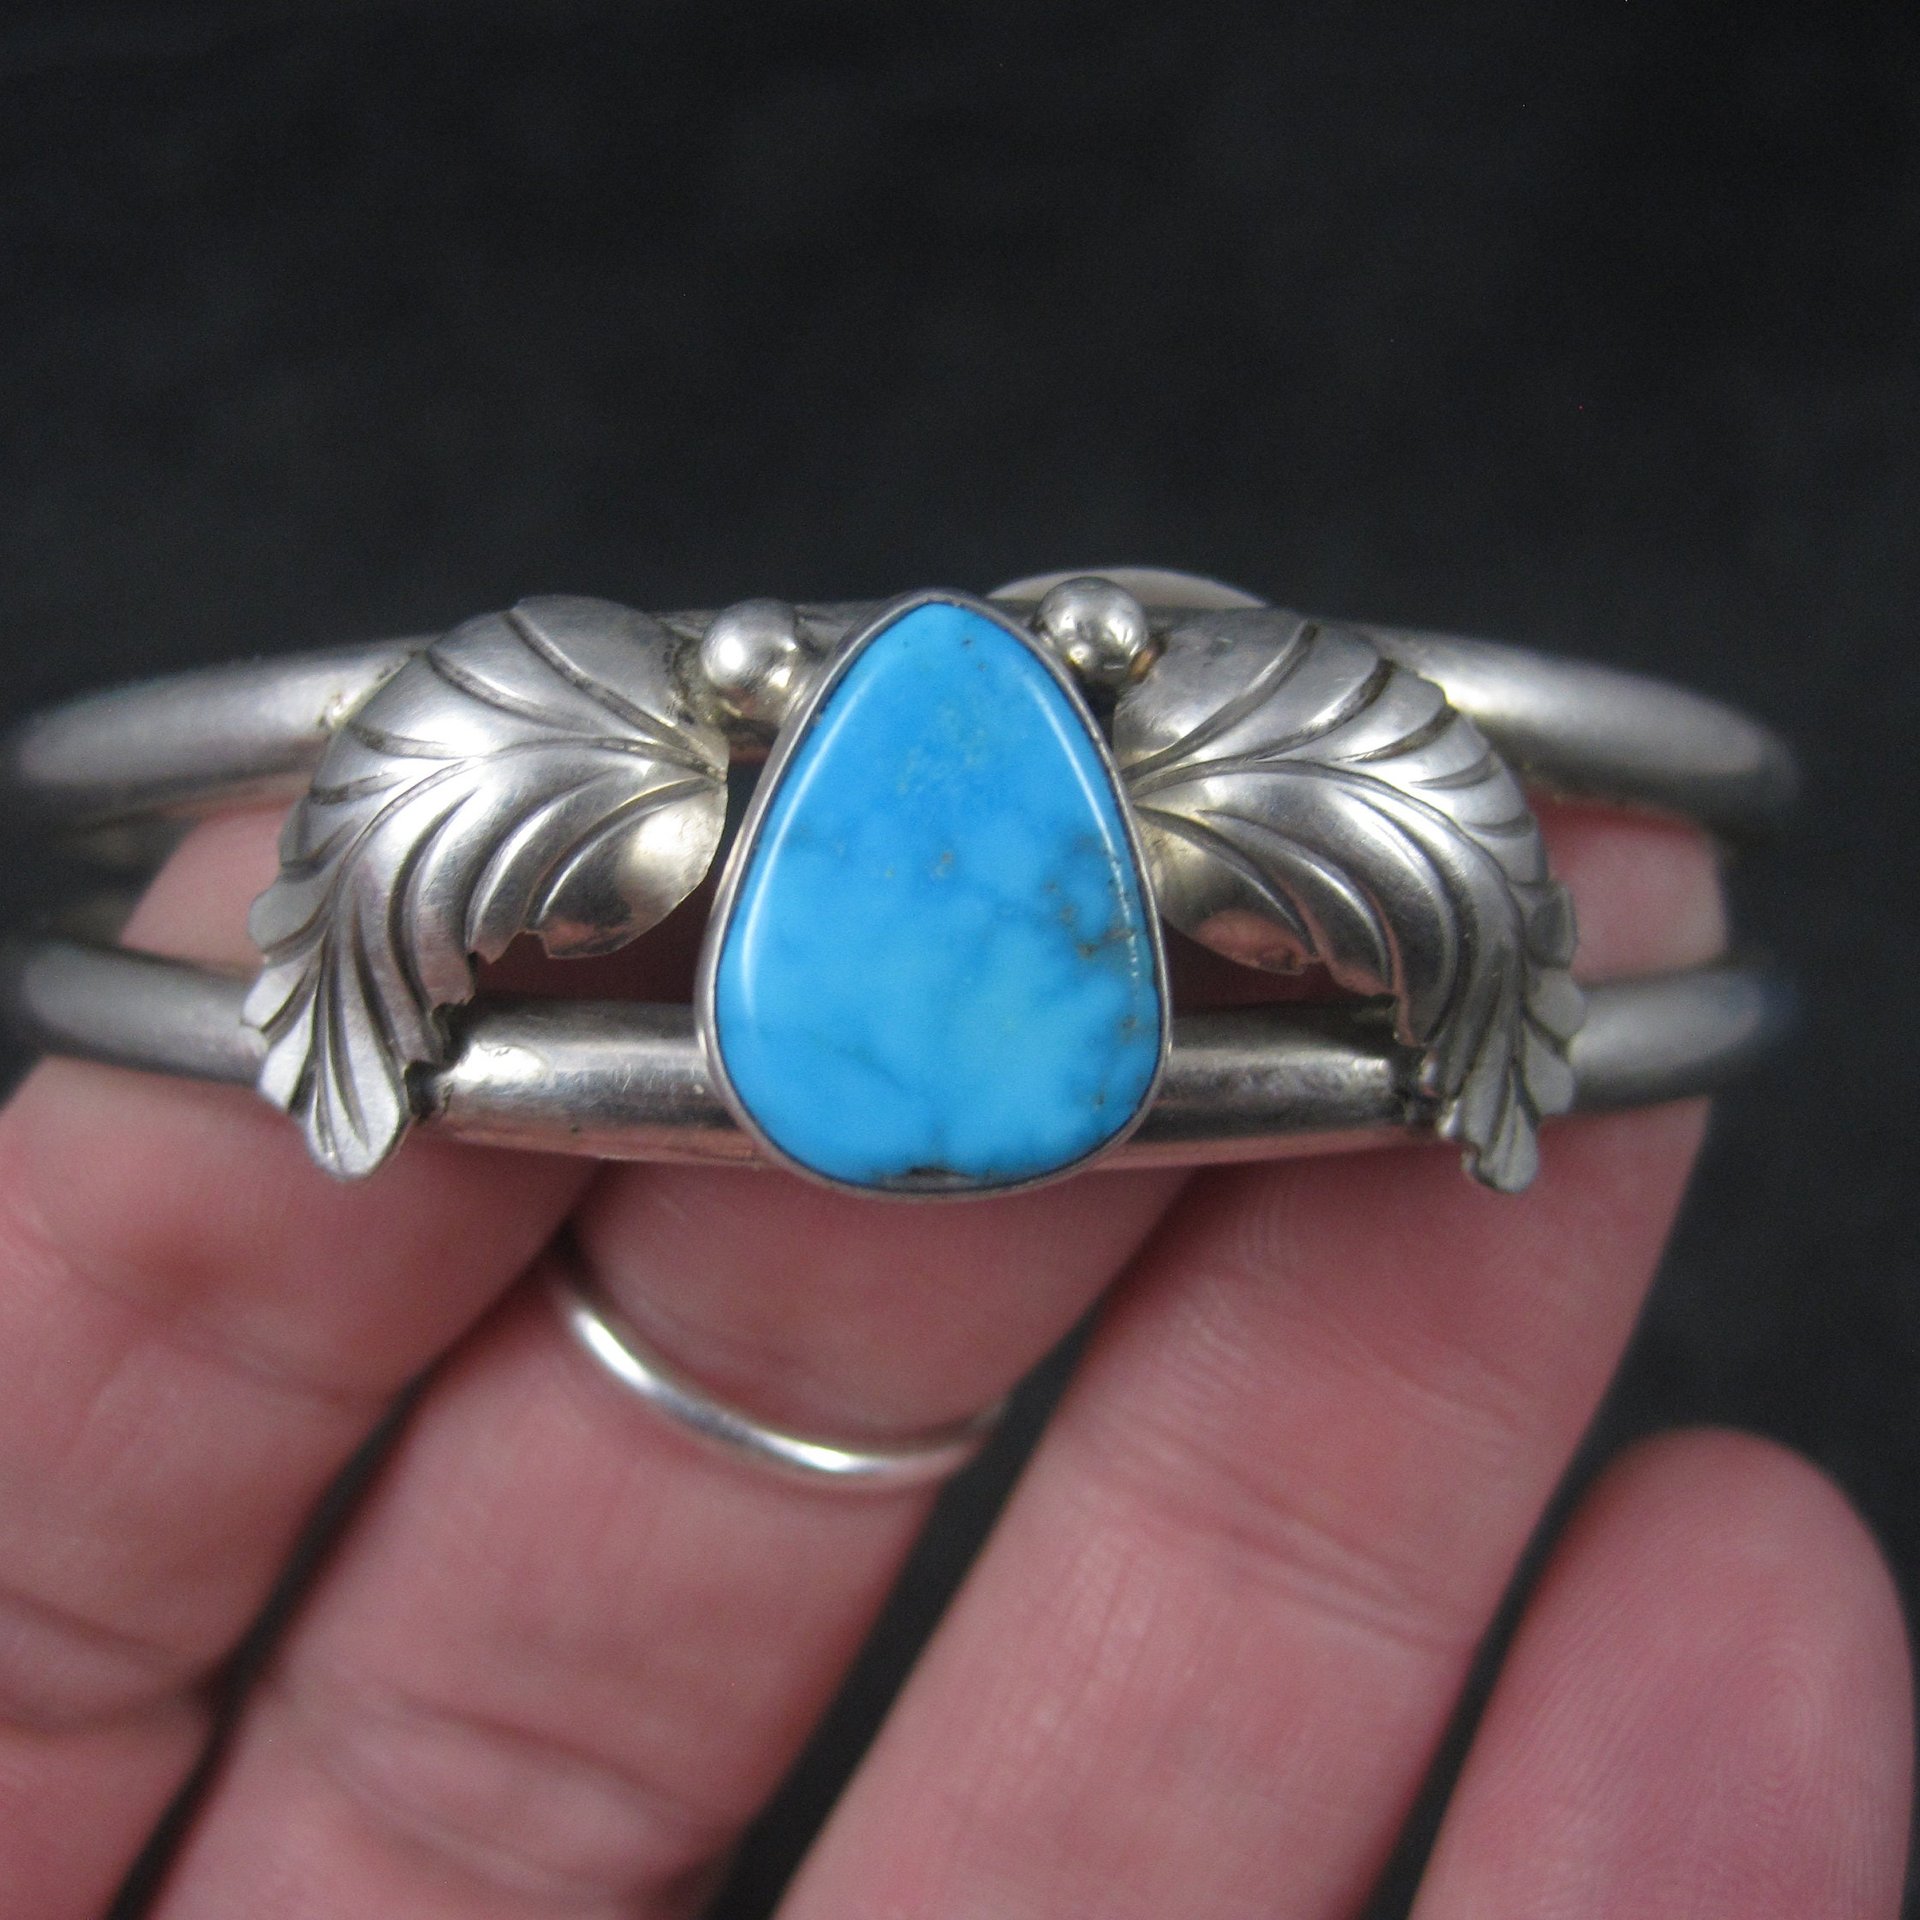 Vintage Southwestern Sterling Turquoise Cuff Bracelet 6.25 Inches